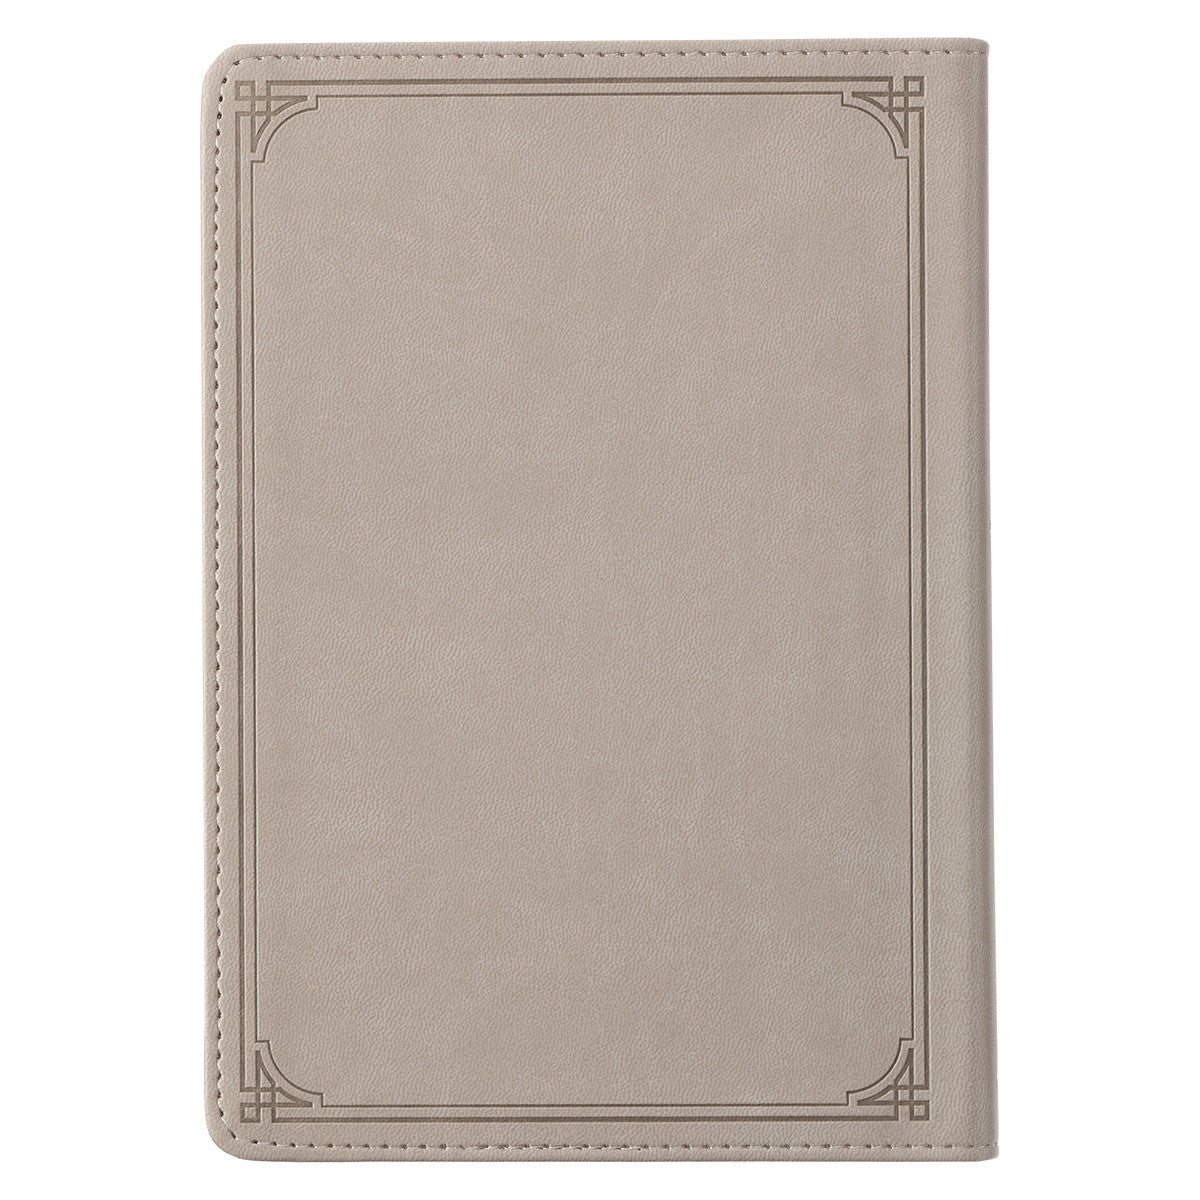 Never Give Up Grey Faux Leather Classic Journal - The Christian Gift Company